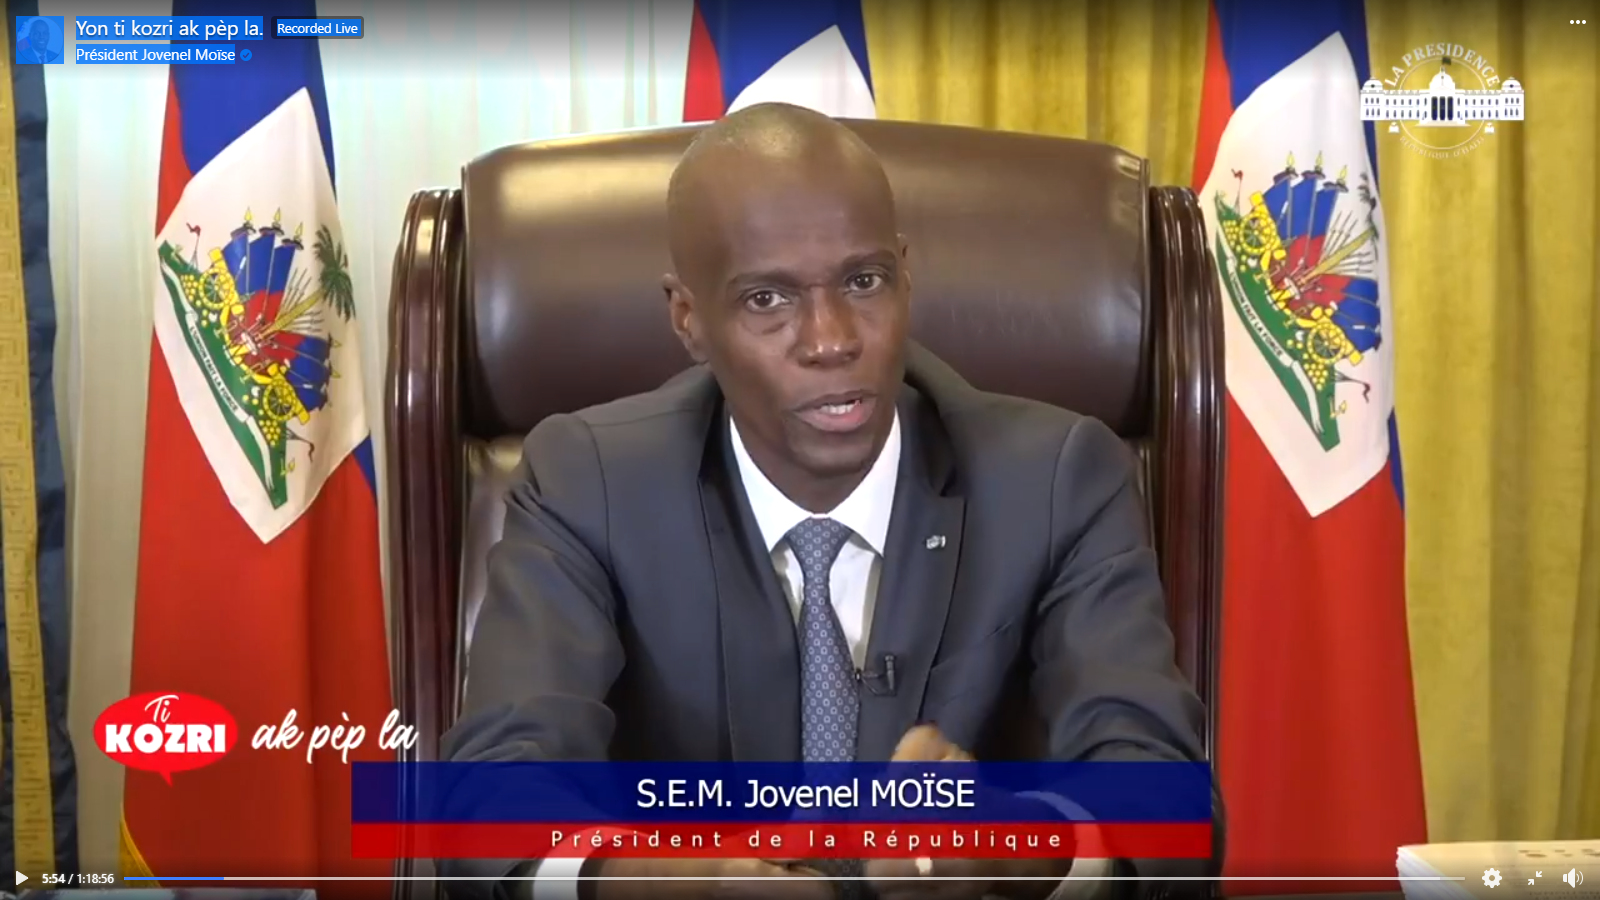 President Vows to Cling to Power as Haiti is “On the Verge of Explosion ...